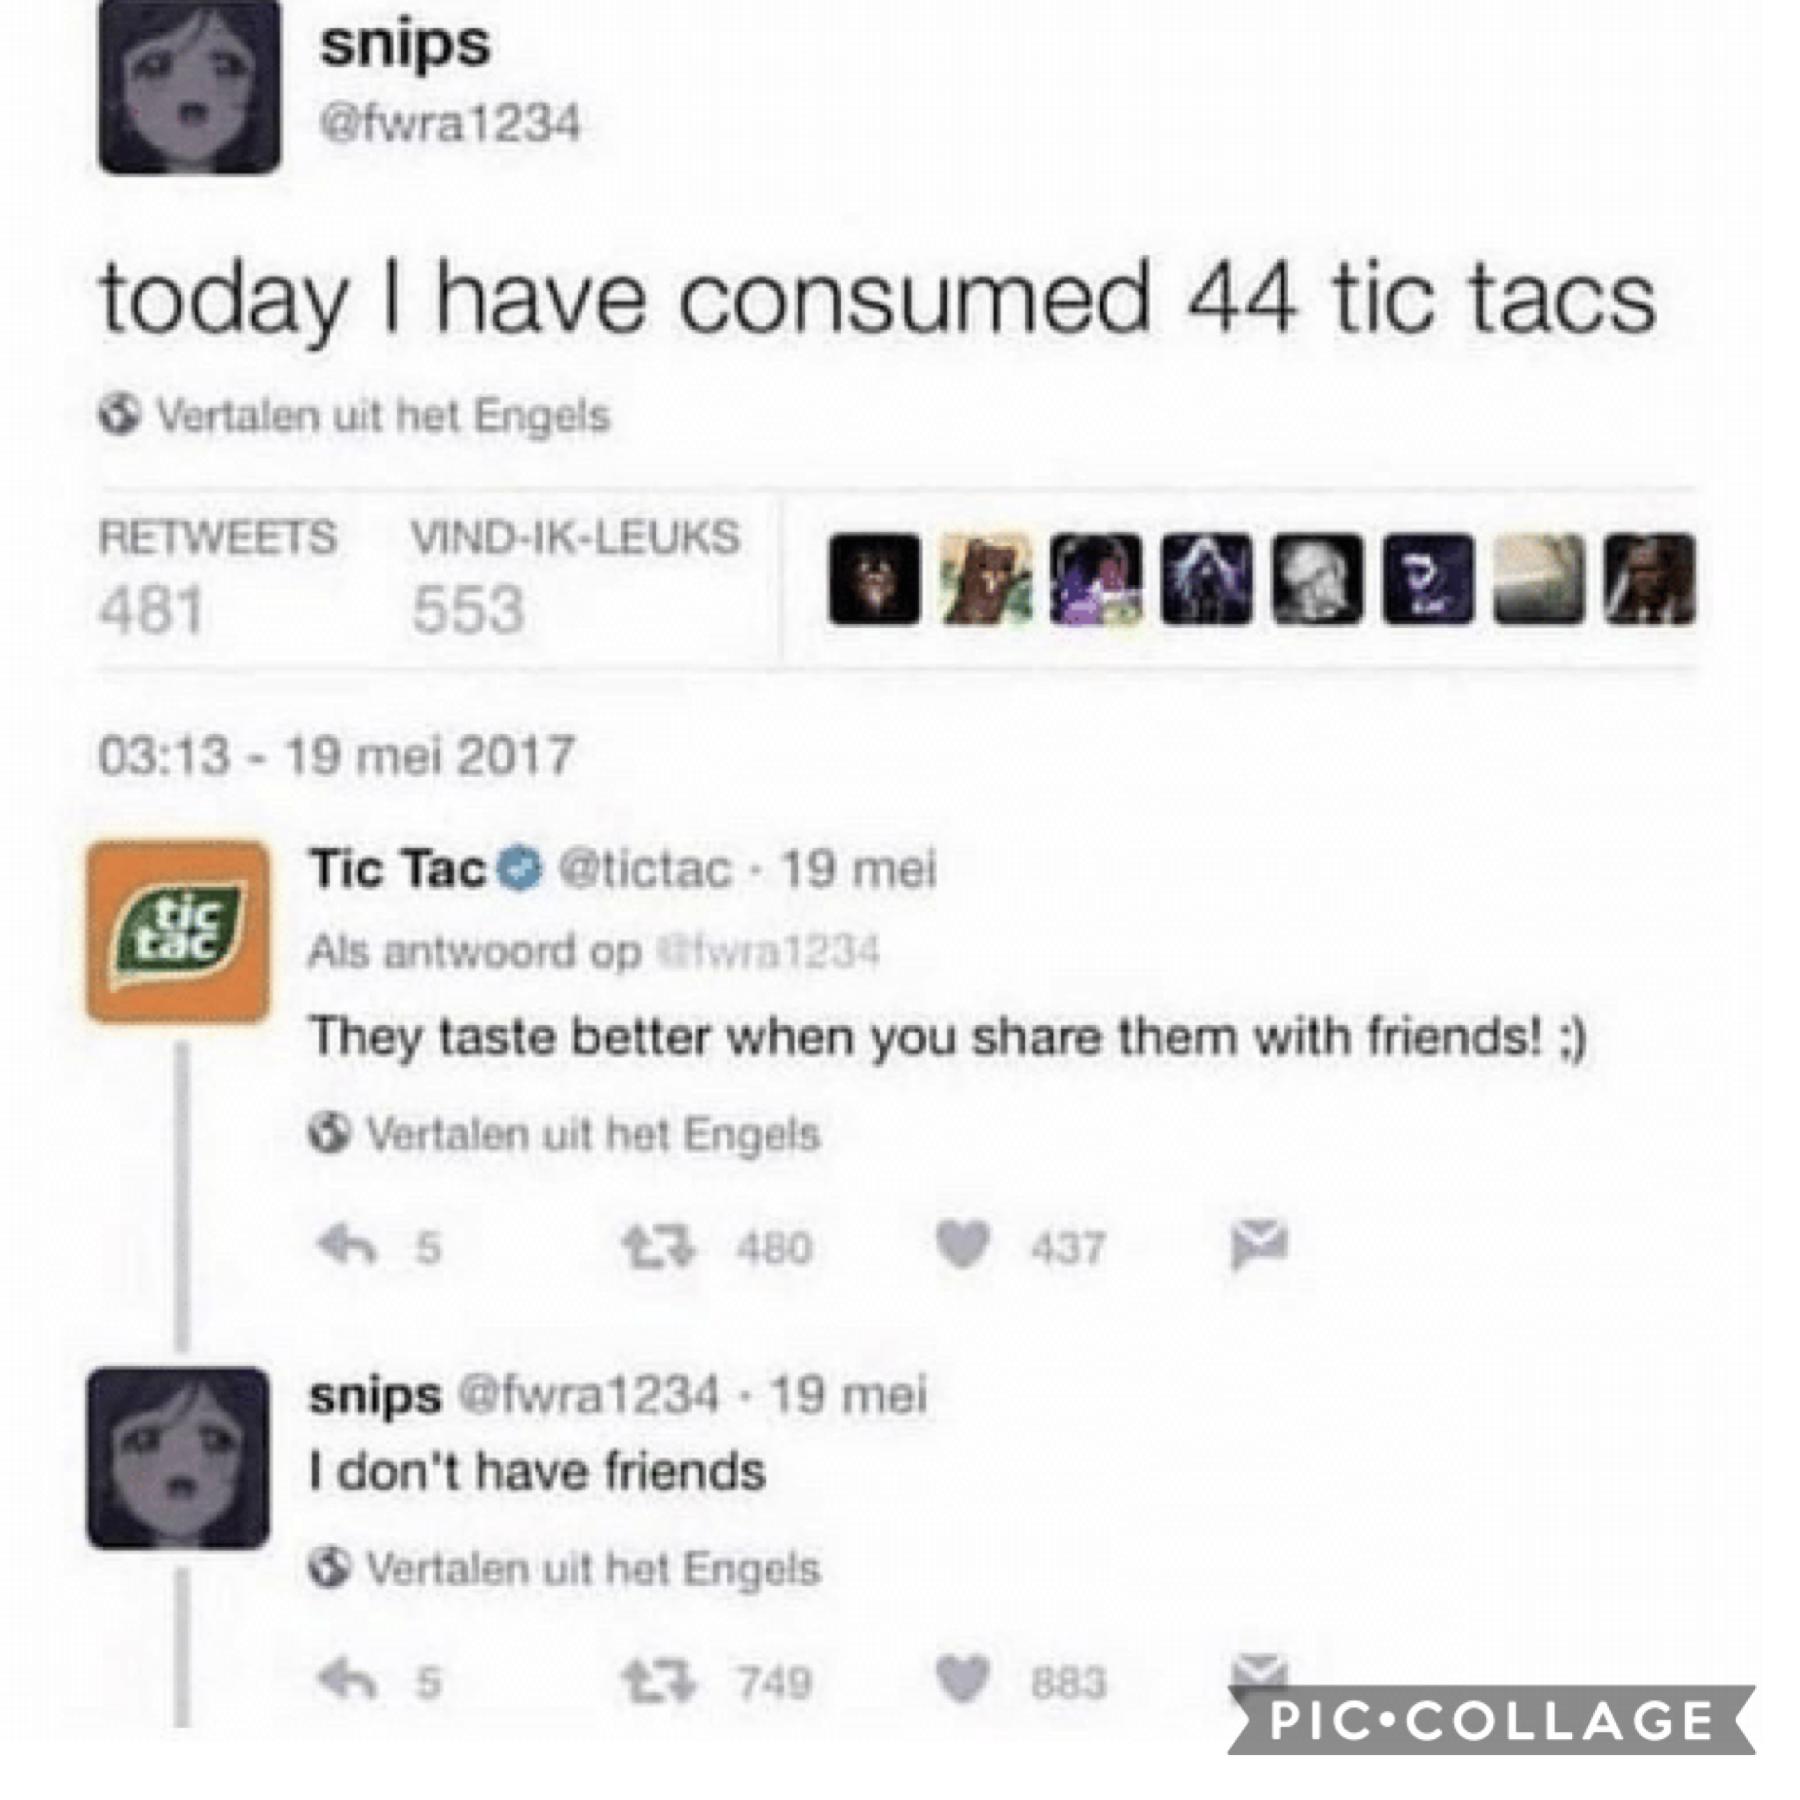 these tic tac memes have transformed me into a higher being